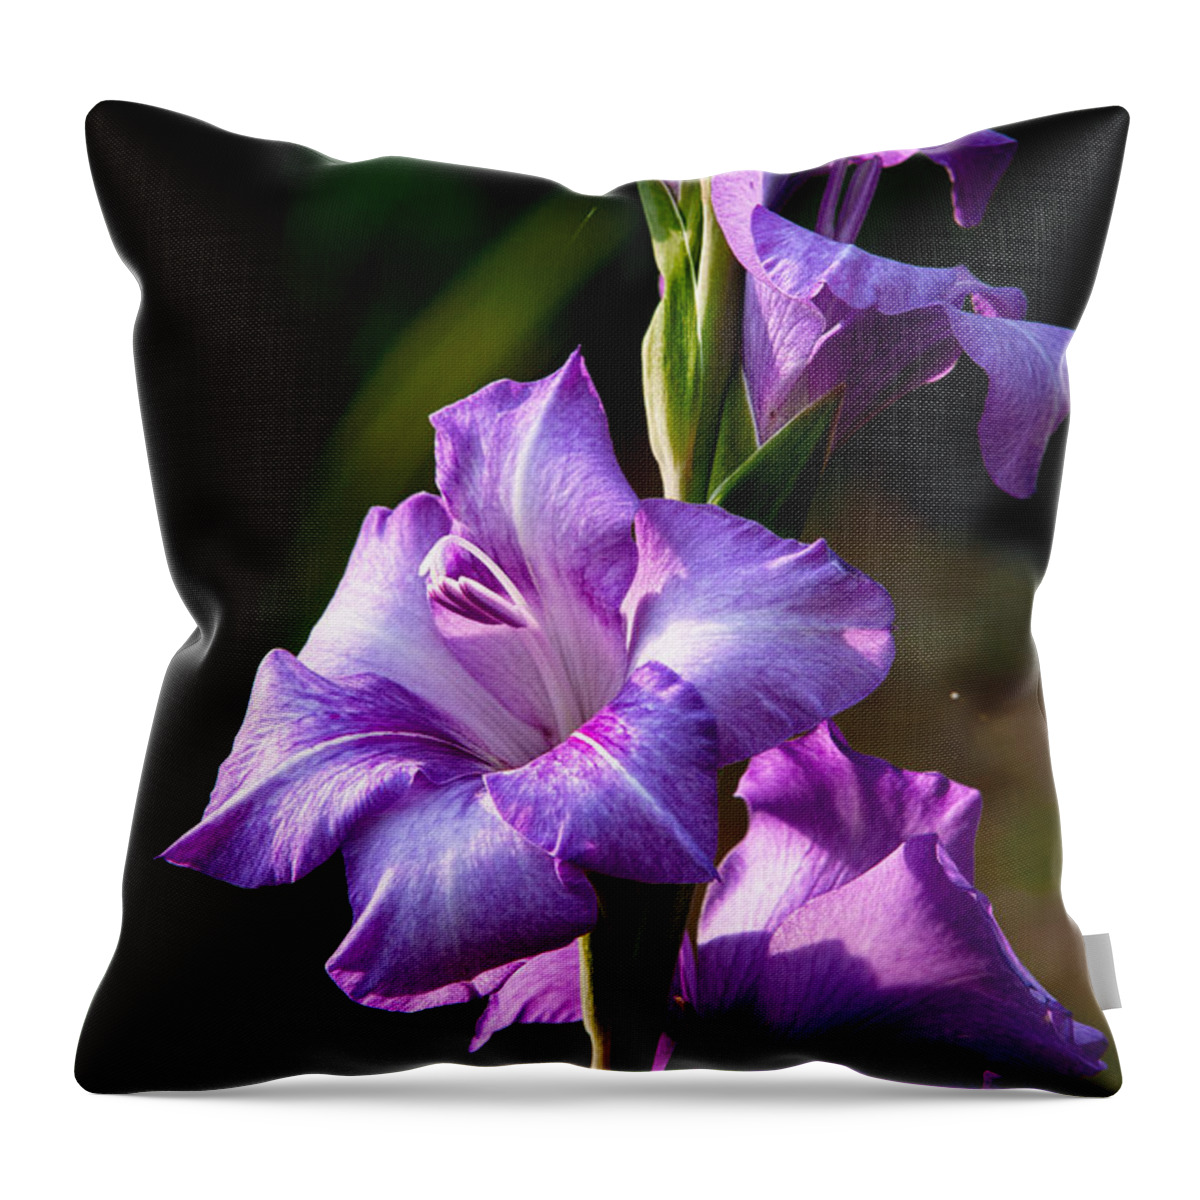 Gladiolas Throw Pillow featuring the photograph Purple Glads by Christopher Holmes